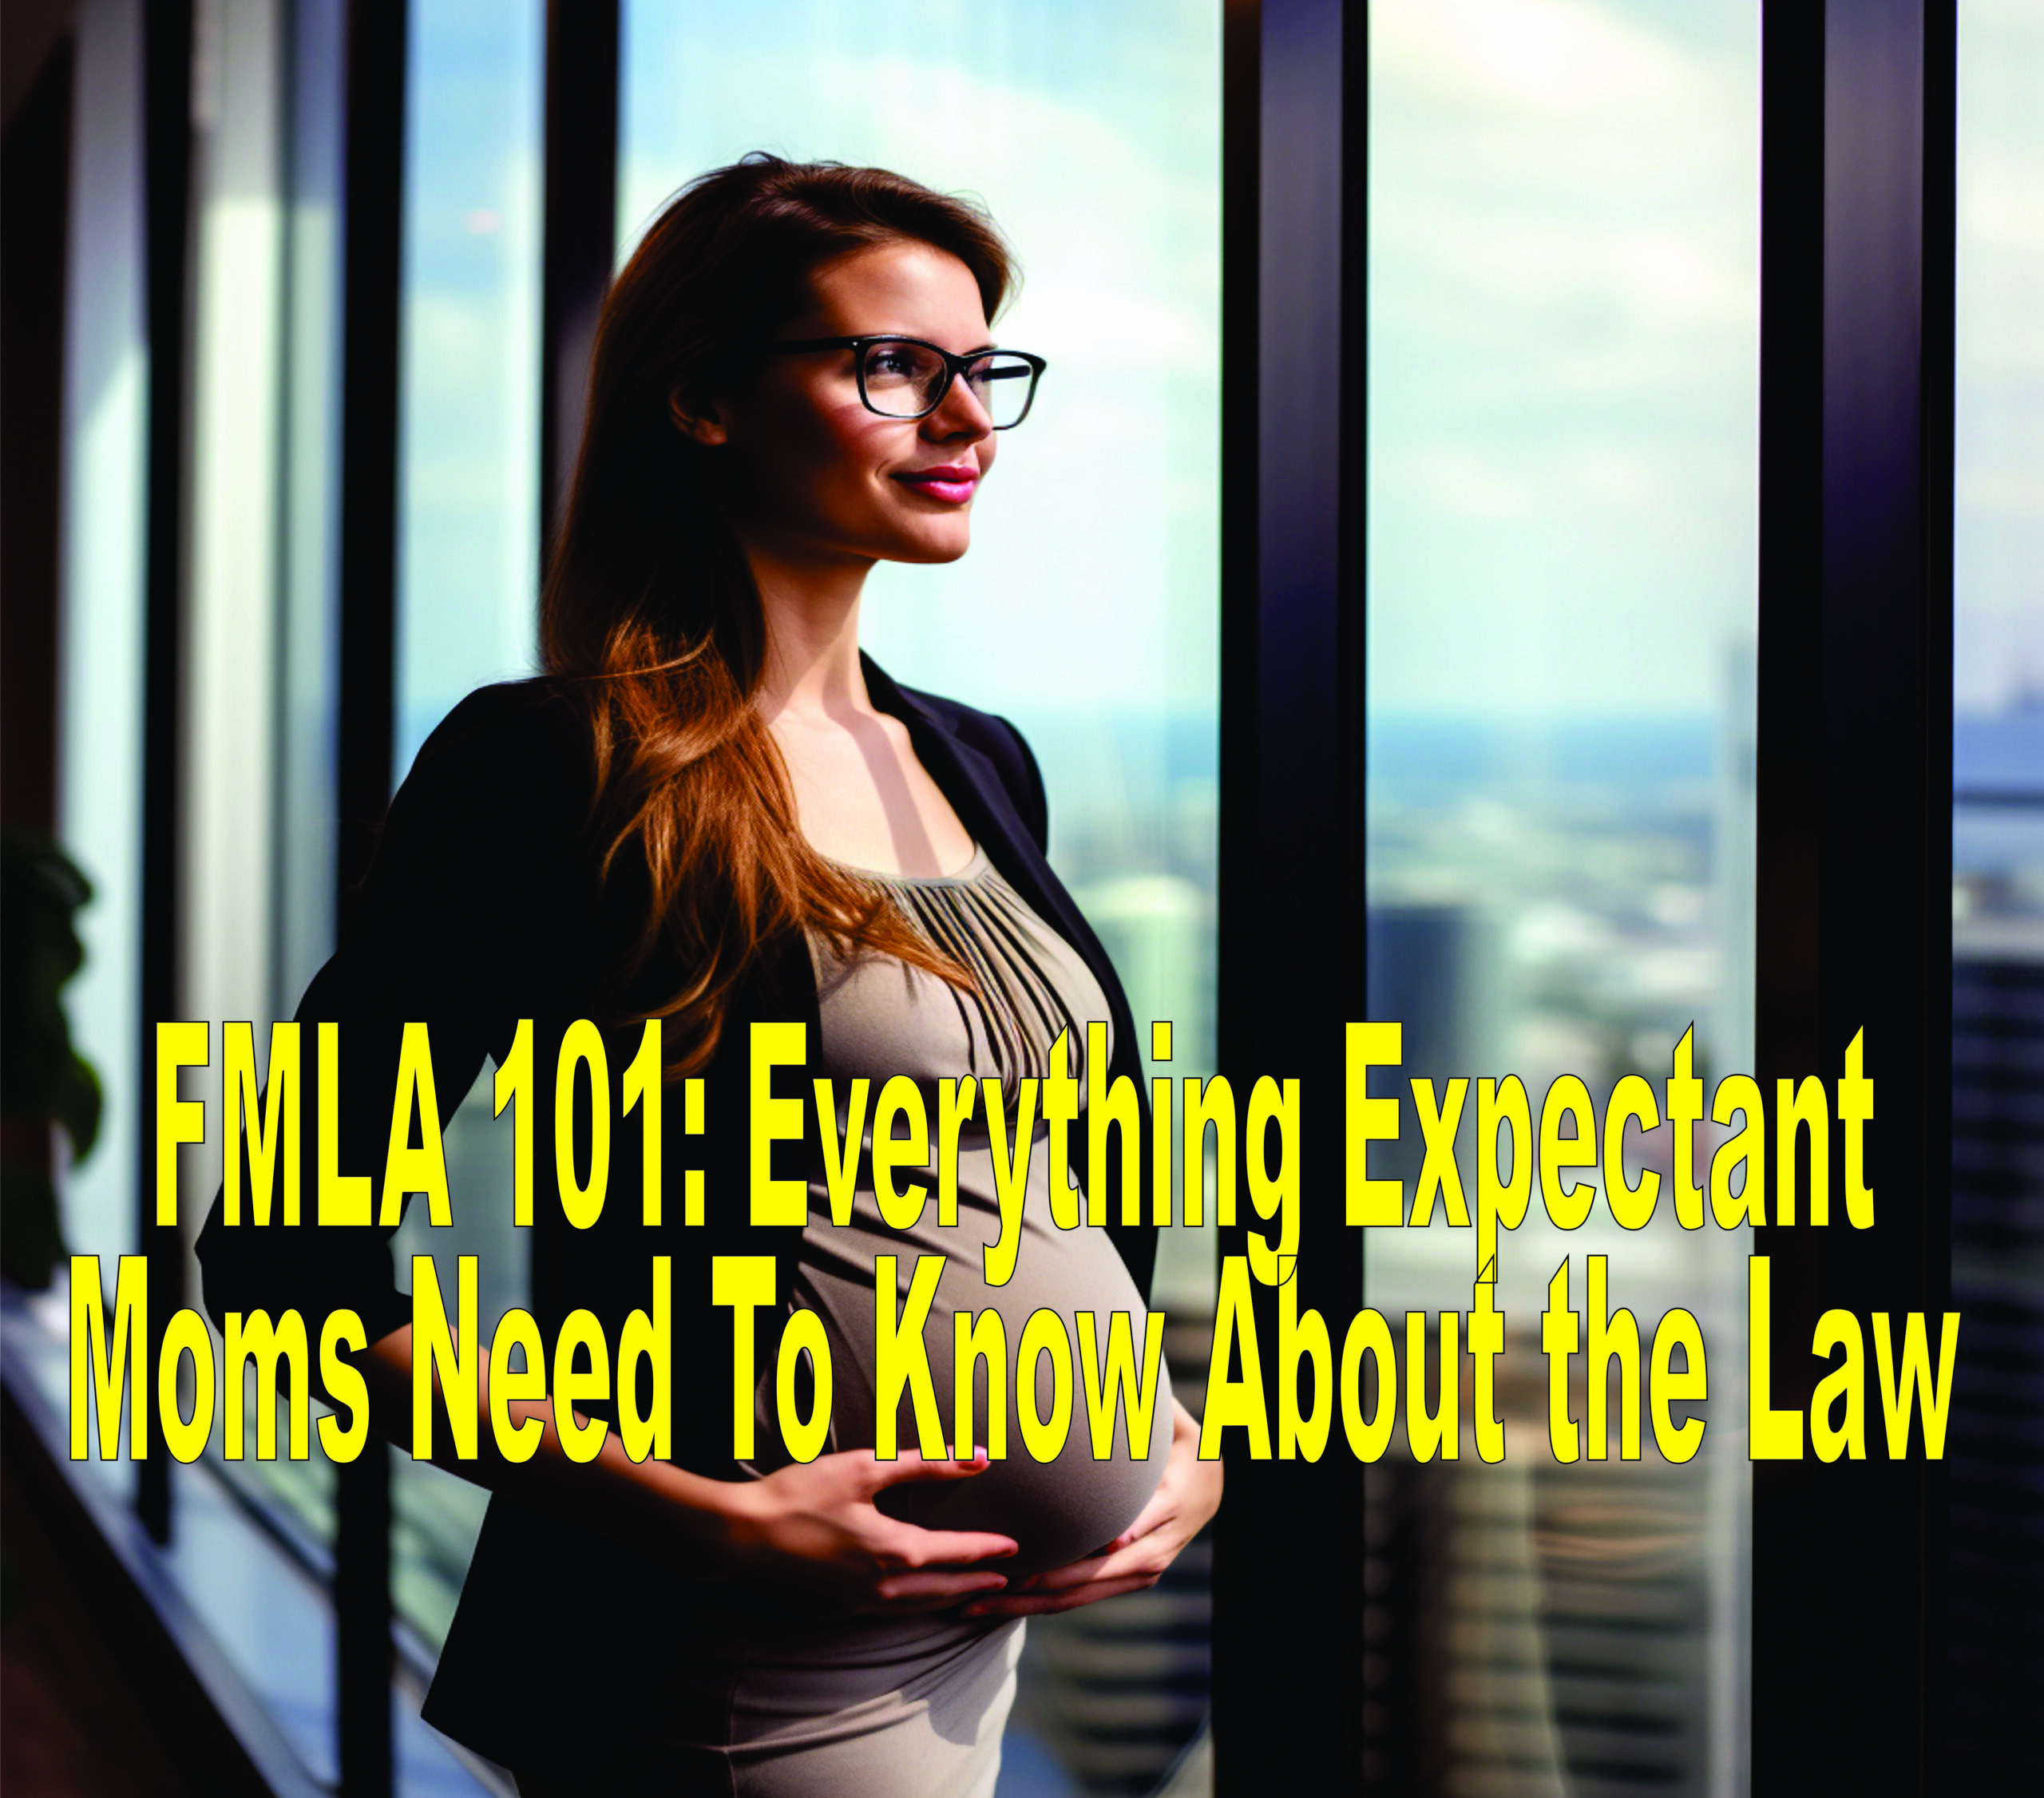 Fmla 101 Everything Expectant Moms Need To Know About The Law